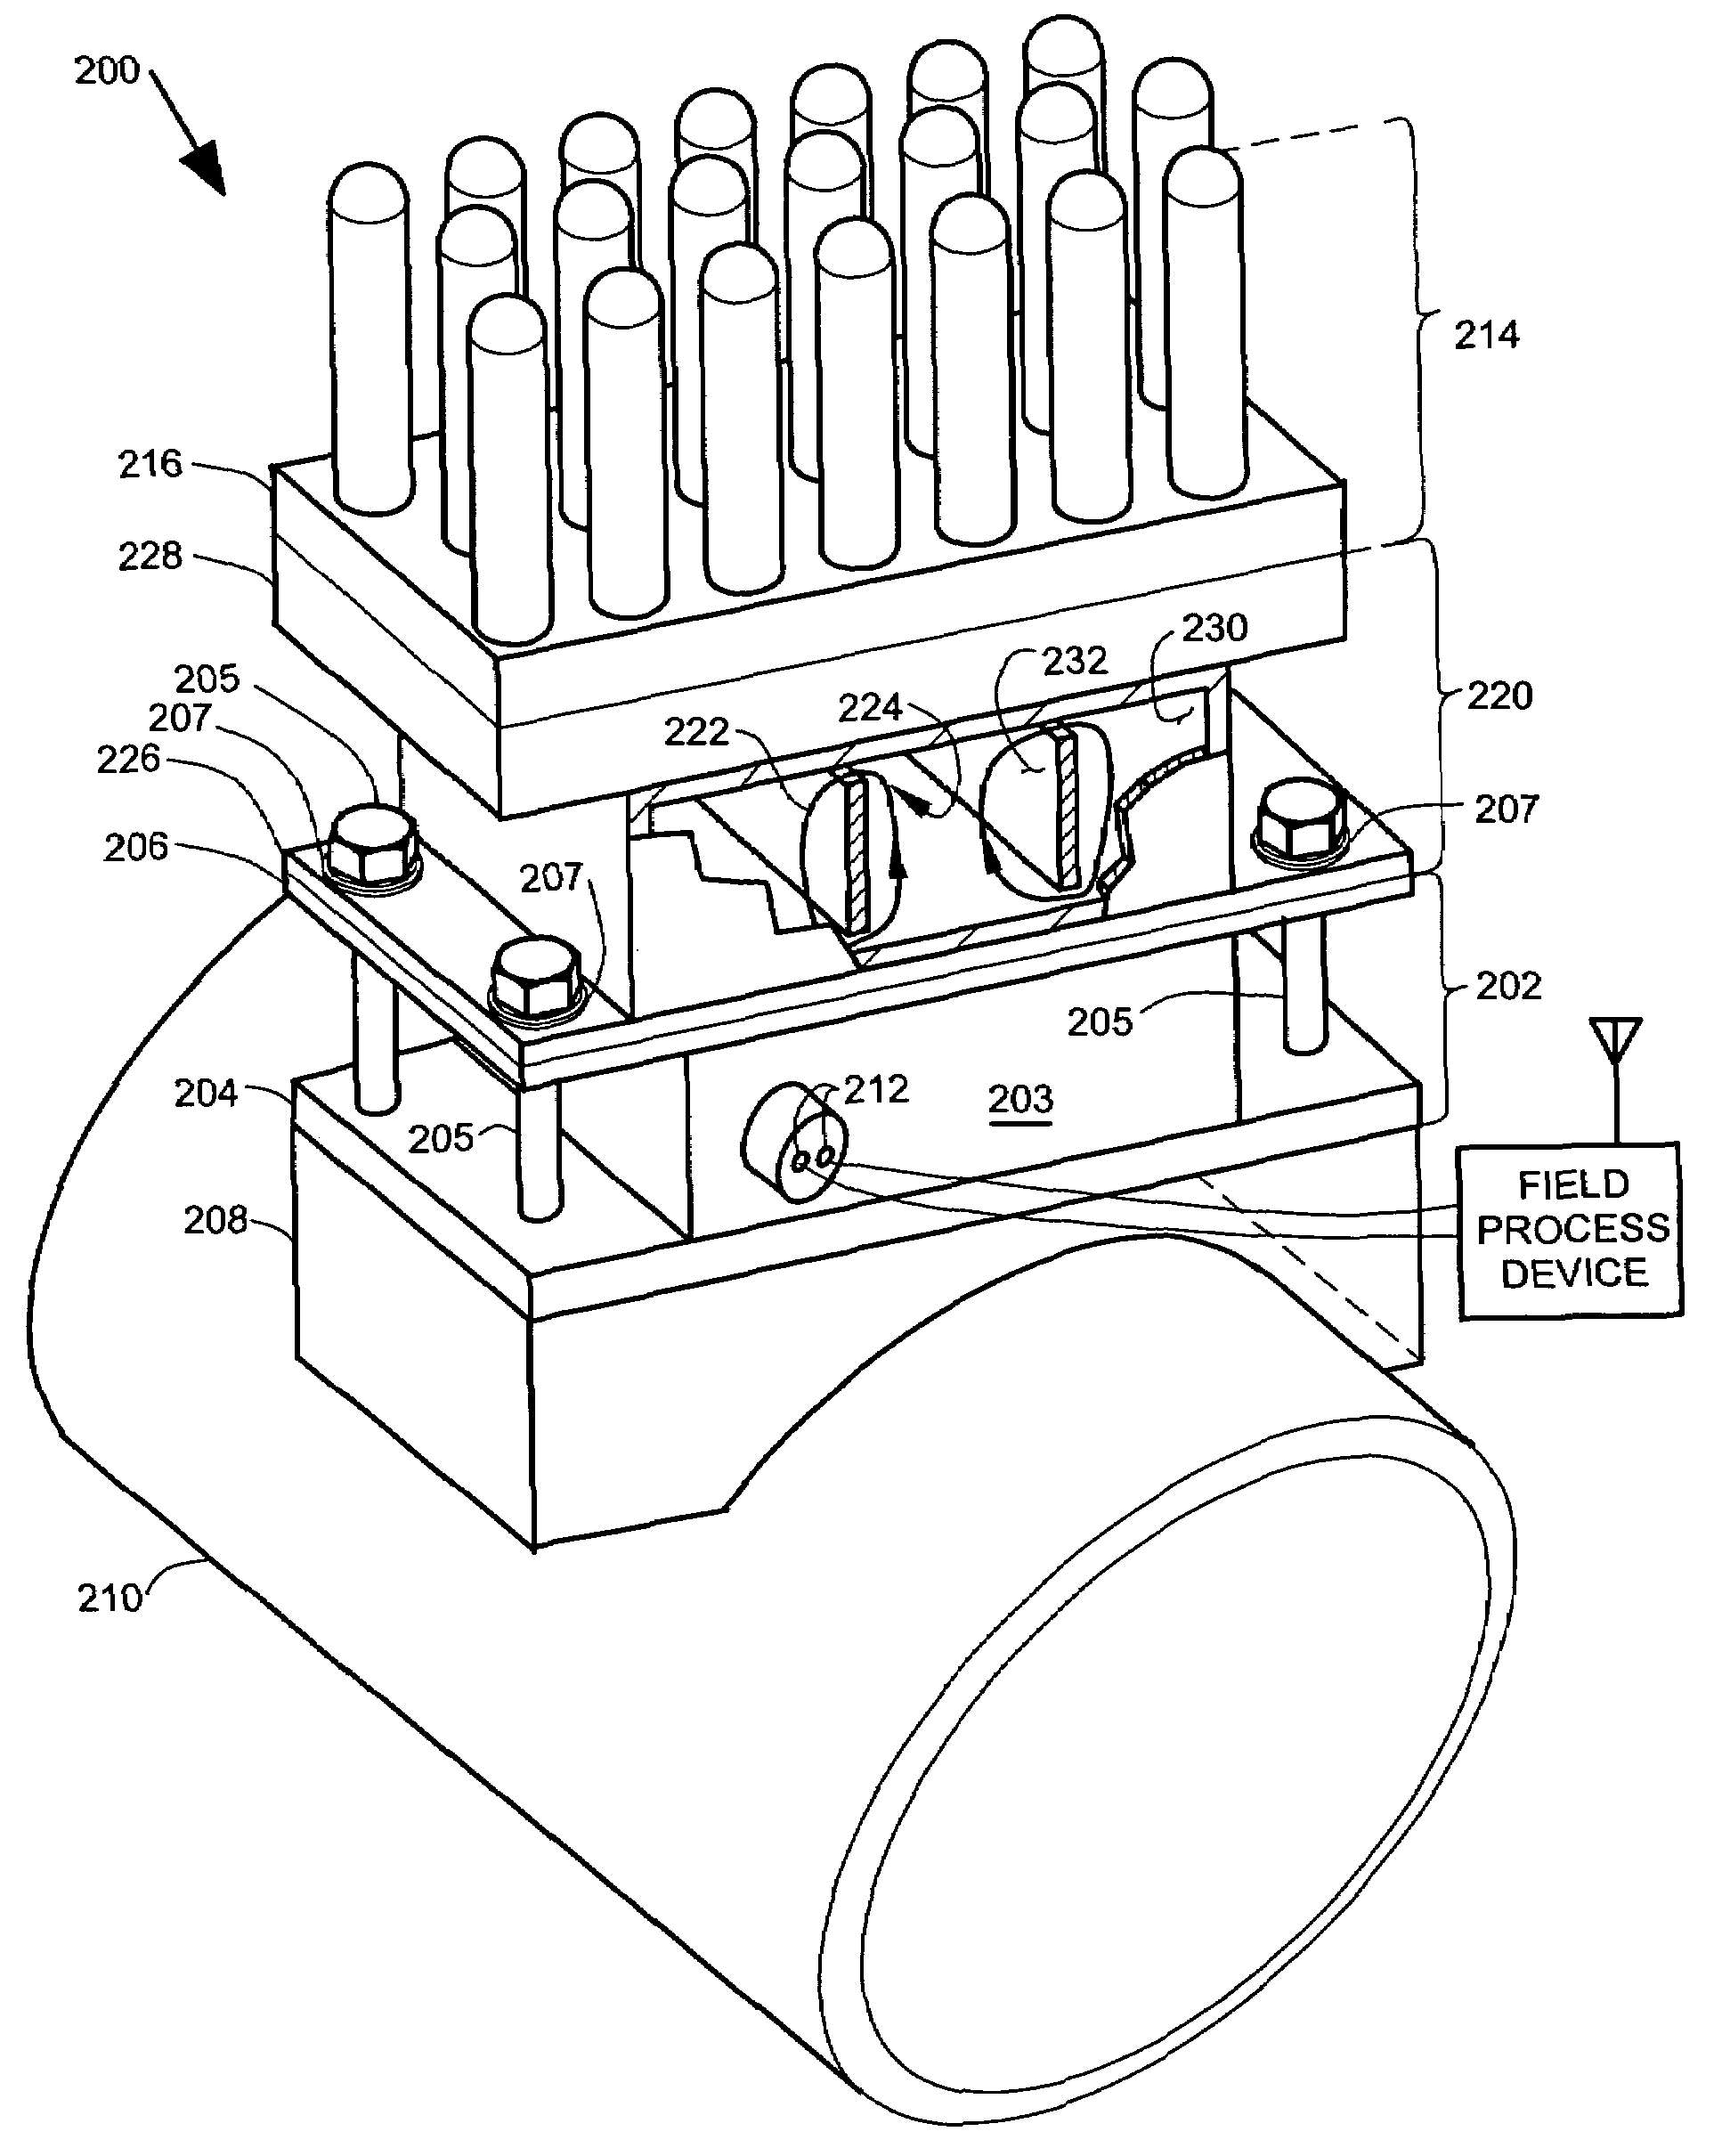 Thermoelectric generator assembly for field process devices